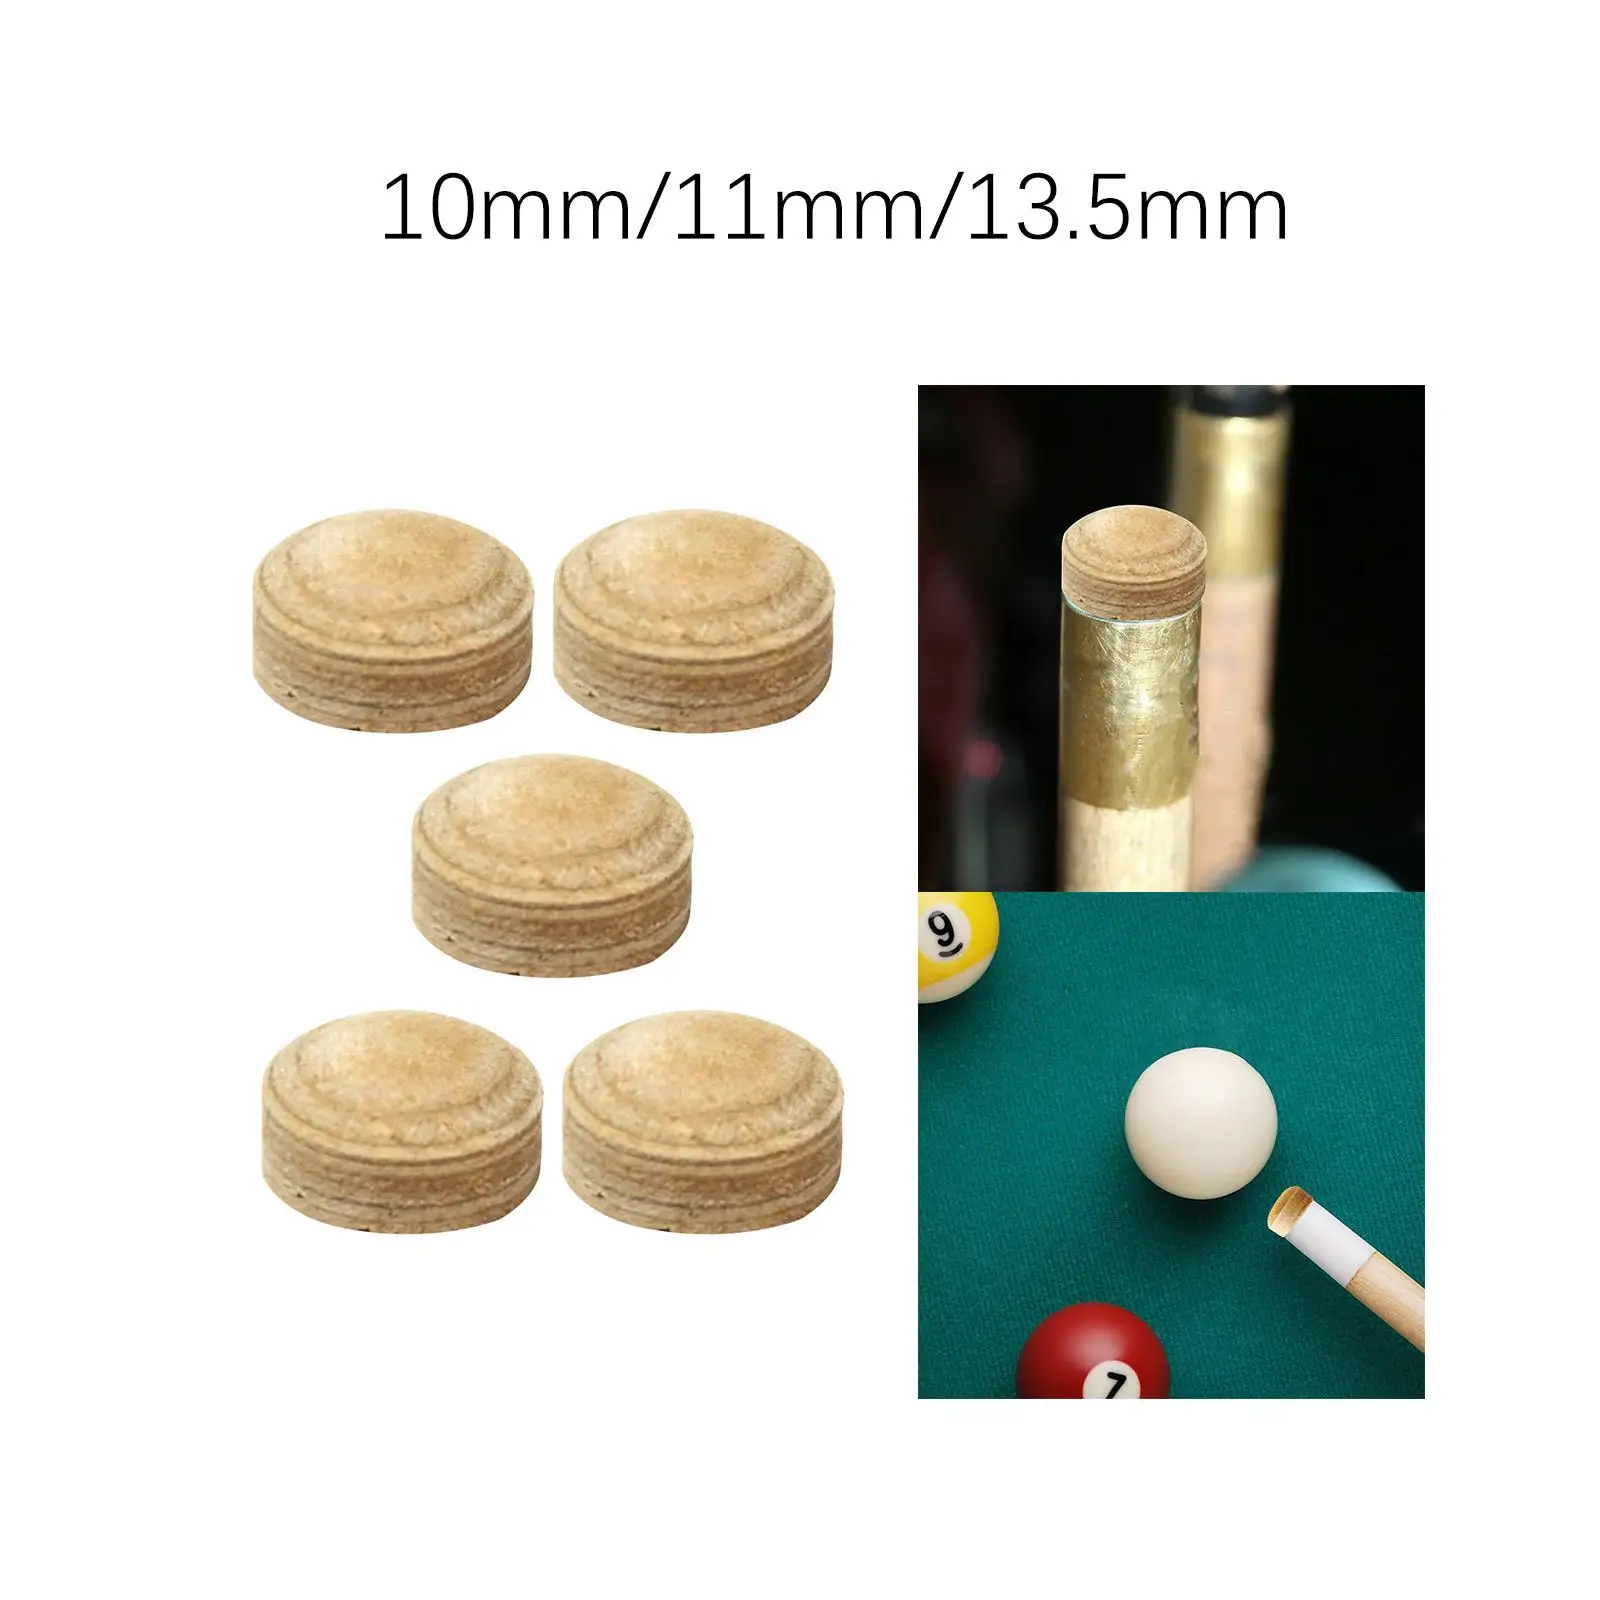 5x Billiard Cue Tips Protector Layered Tips Billiard Game Artificial Leather